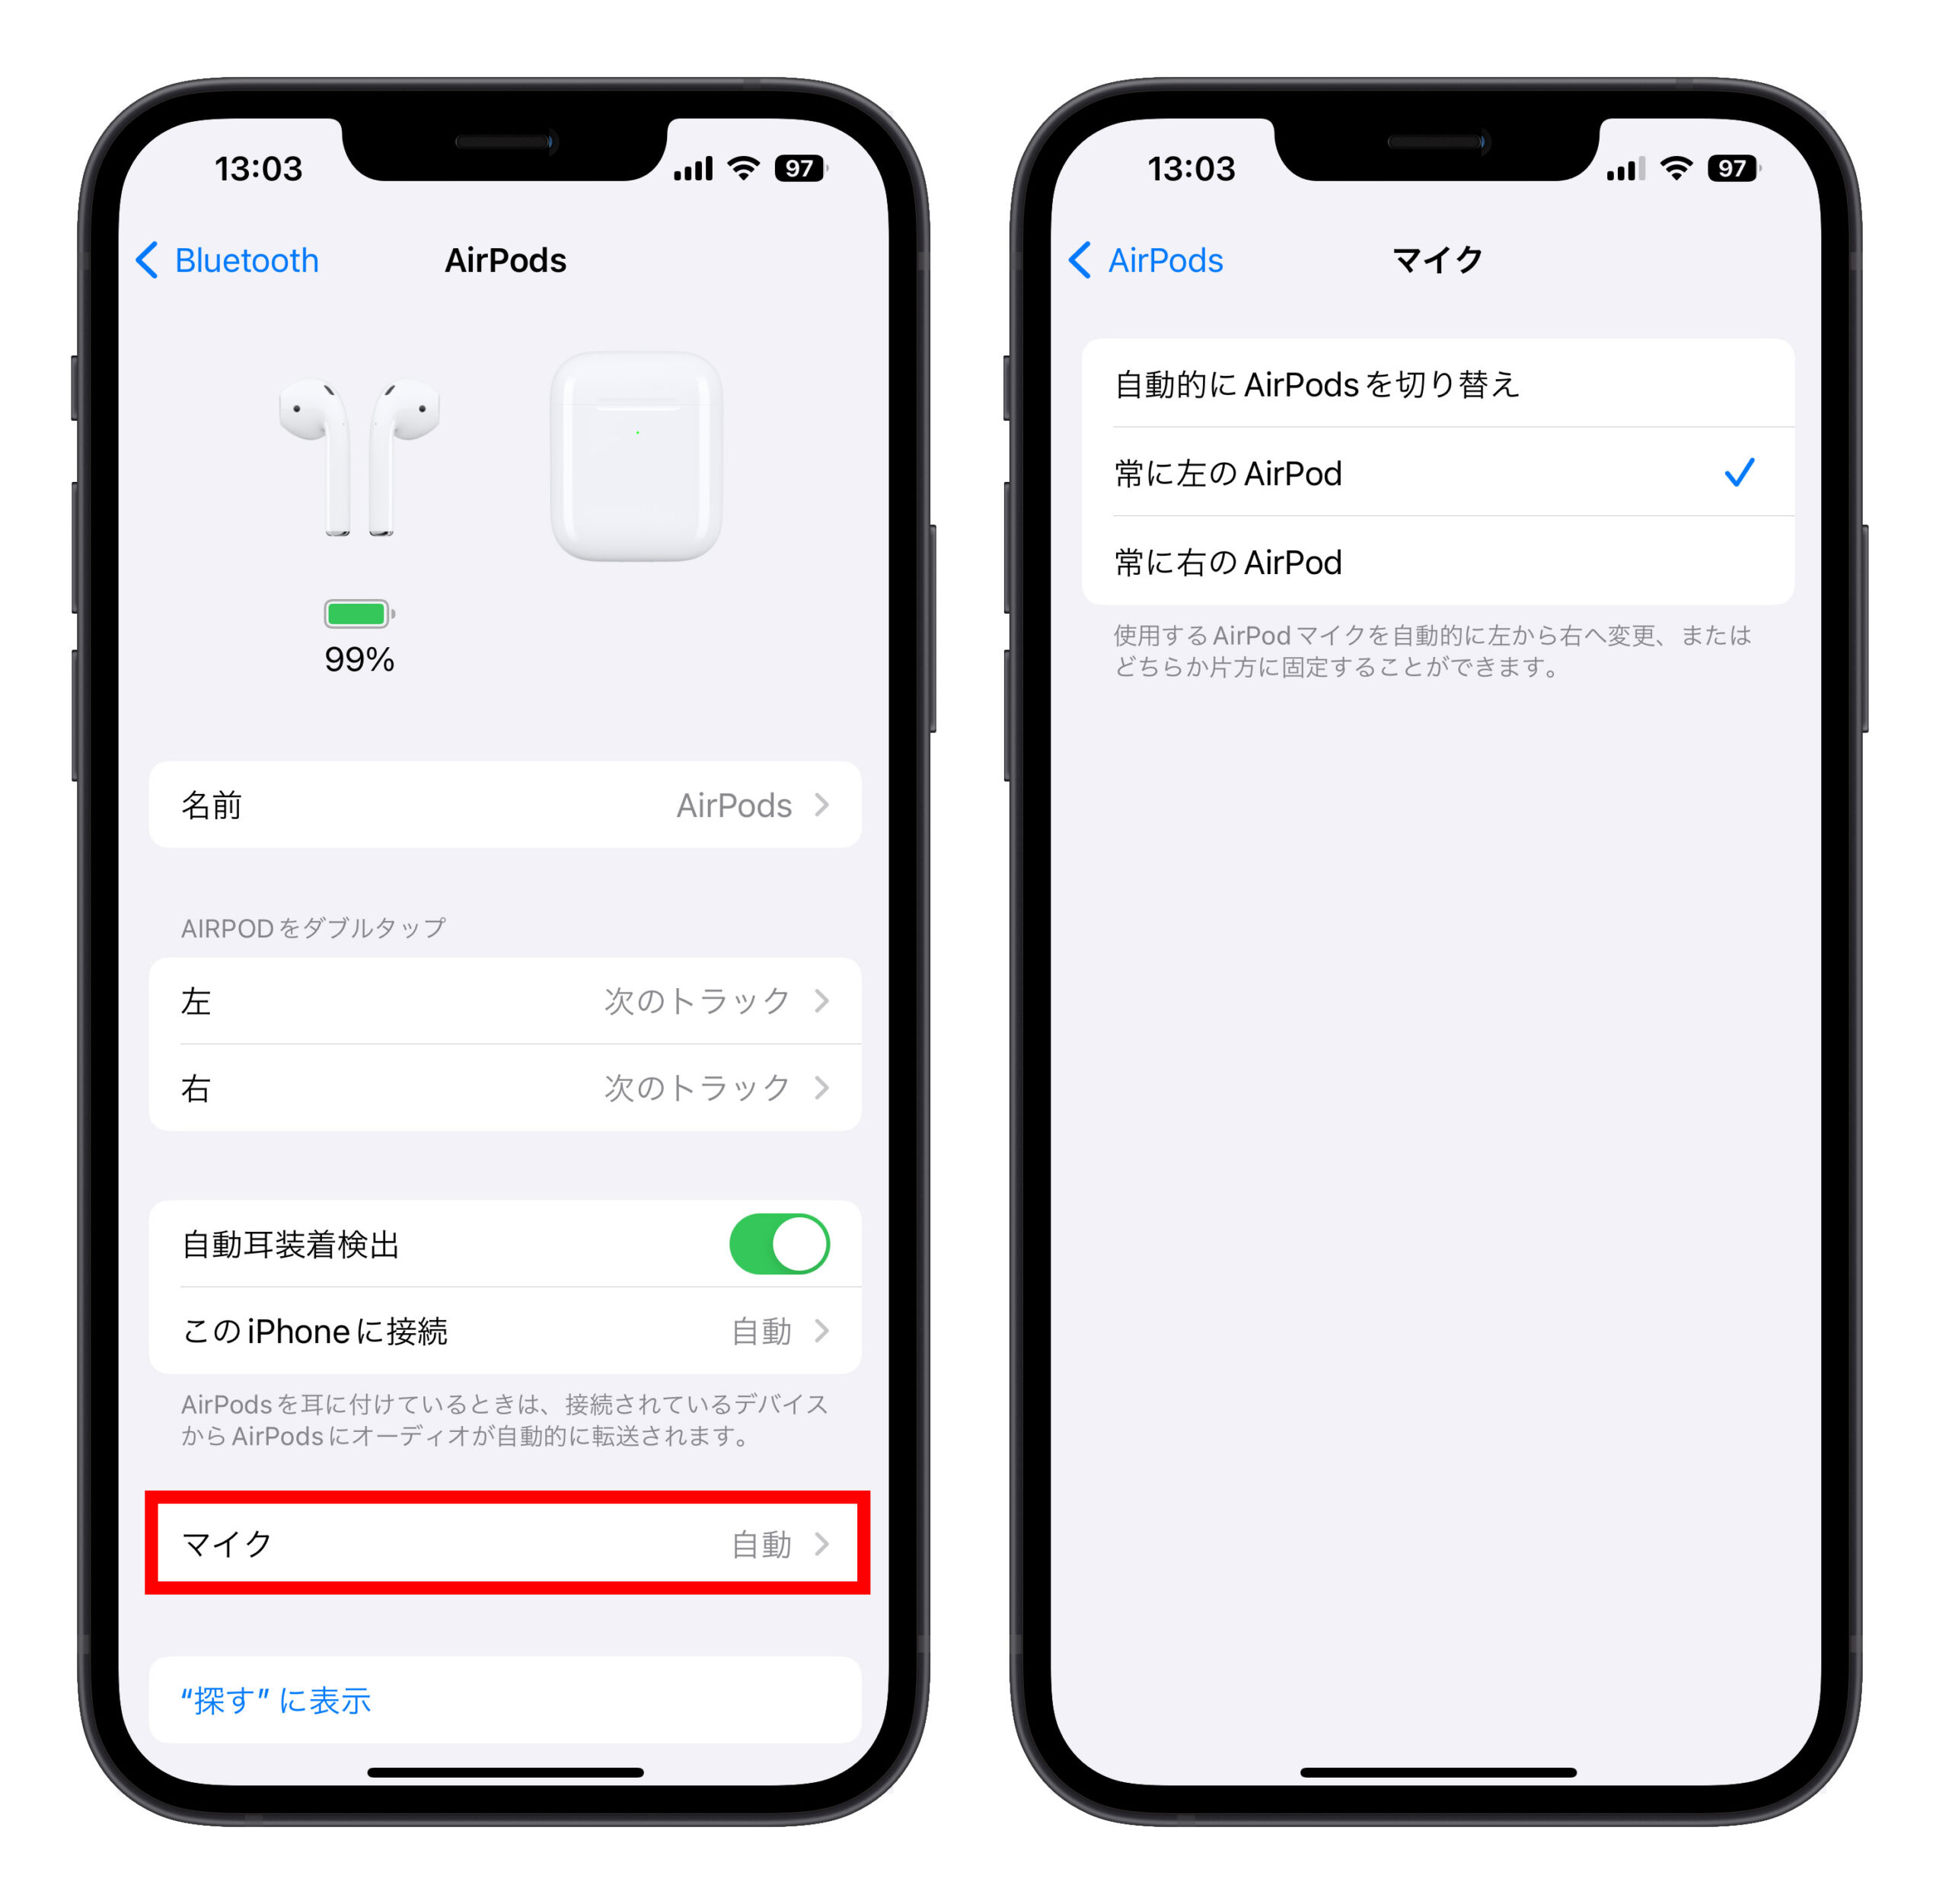 AirPods をマイクに使用